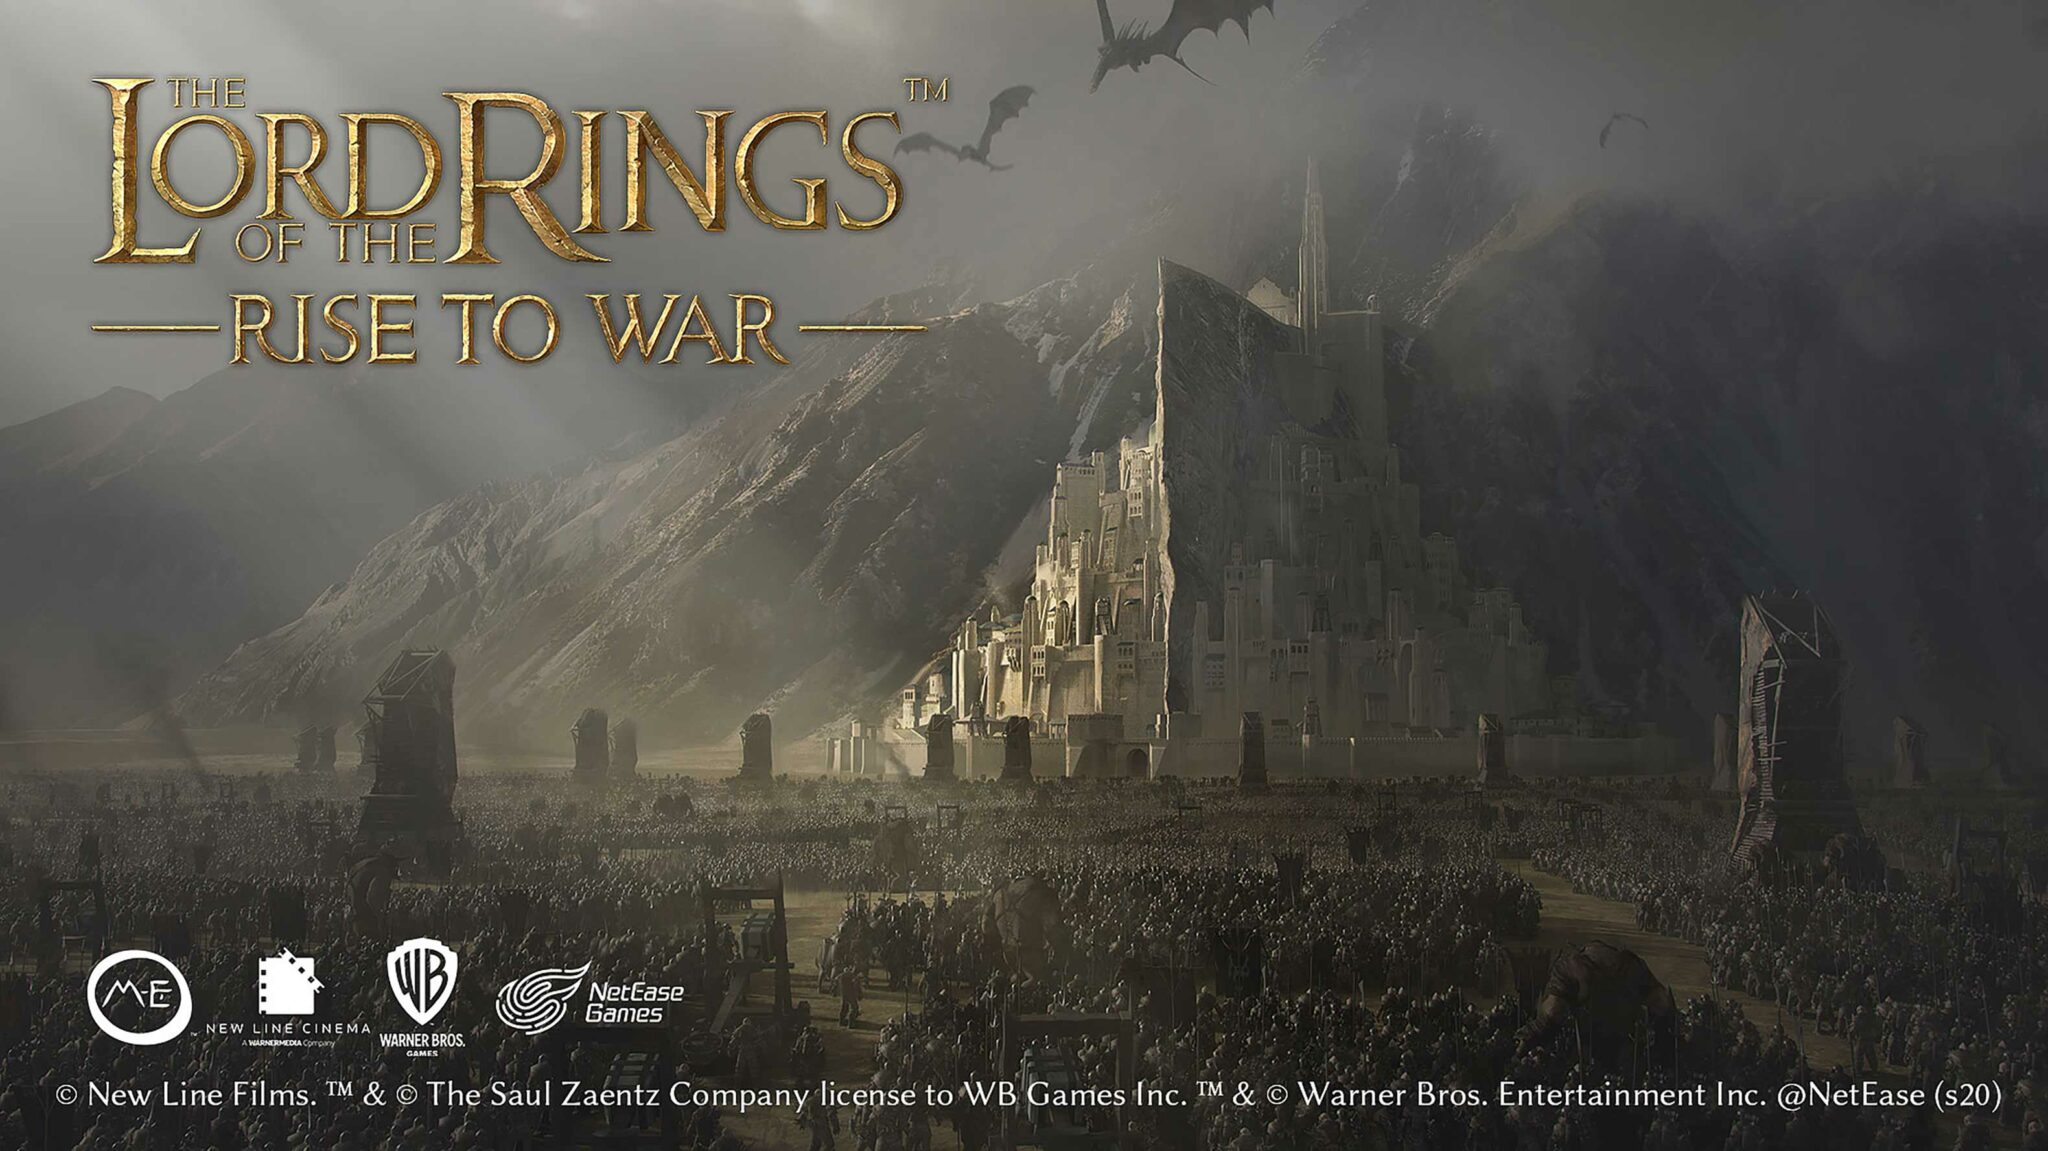 Download & Play The Lord of the Rings: War on PC & Mac with NoxPlayer (Emulator)